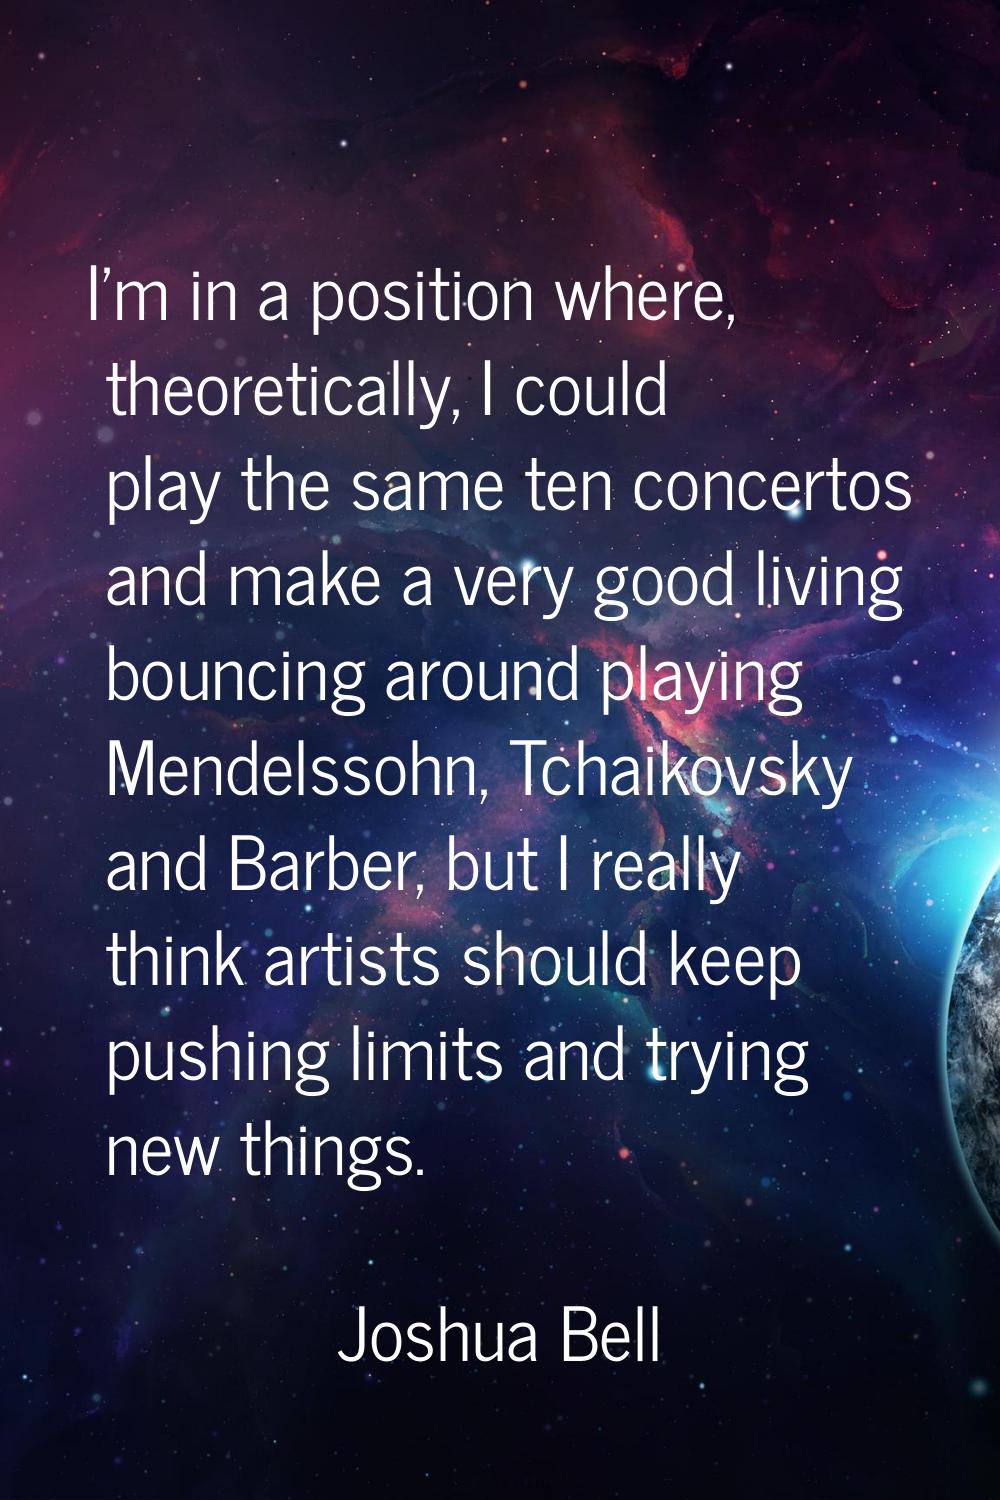 I'm in a position where, theoretically, I could play the same ten concertos and make a very good li